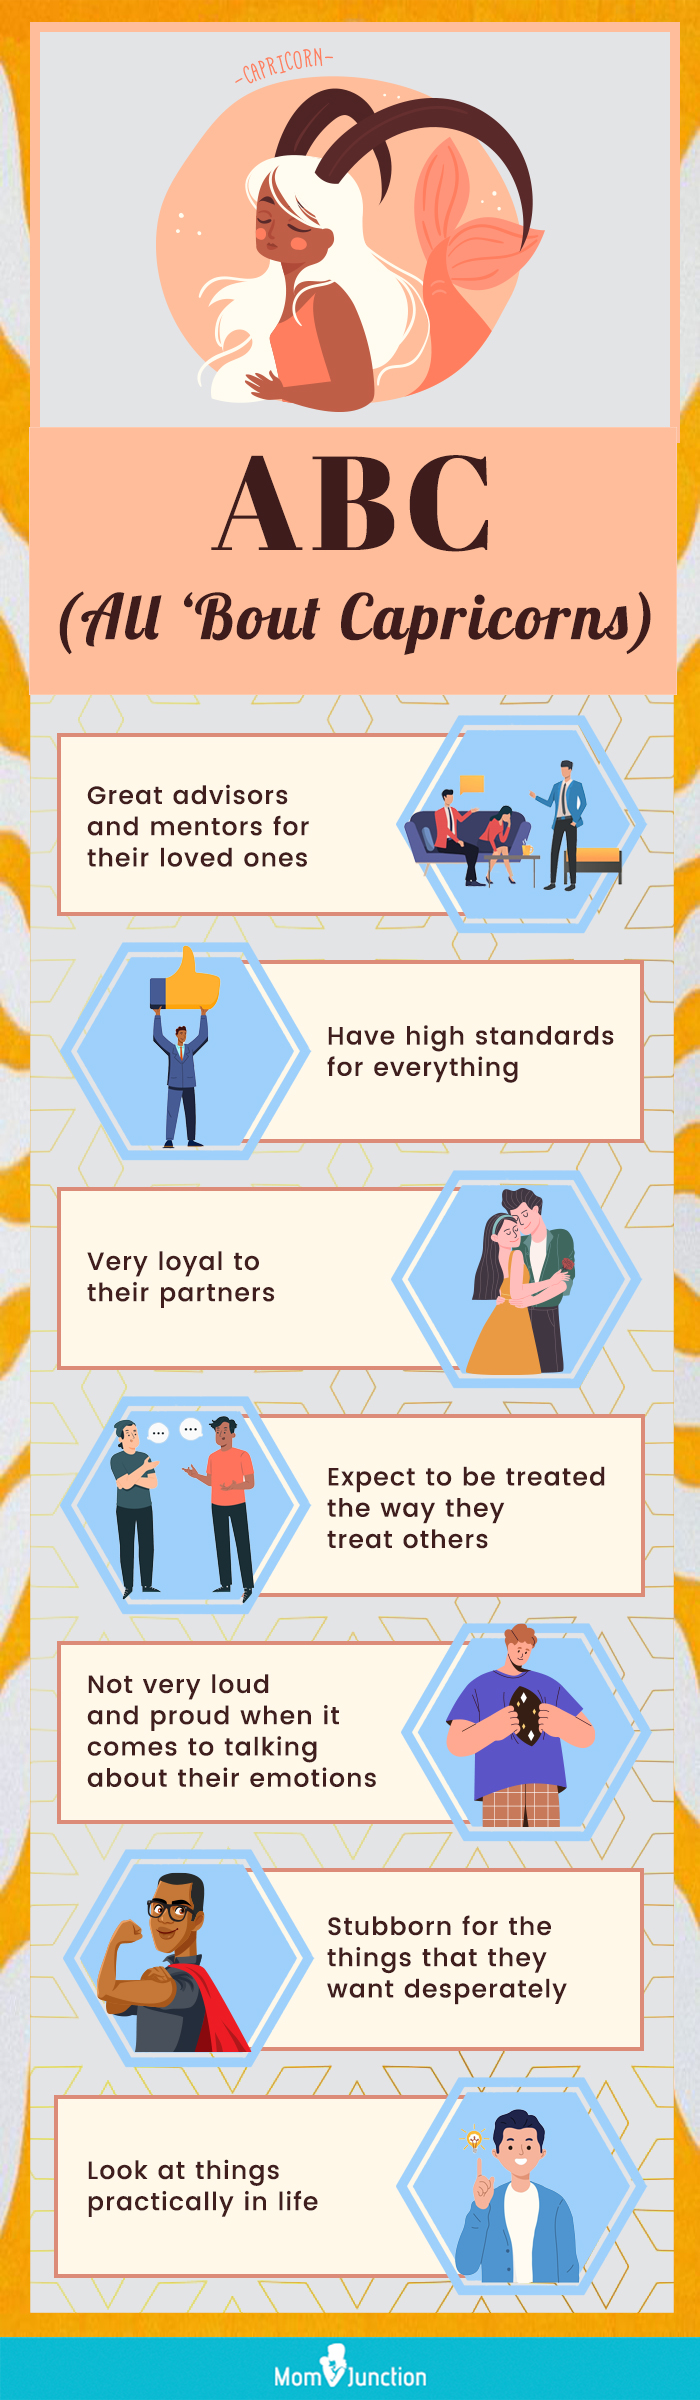 all about capricorns (infographic)